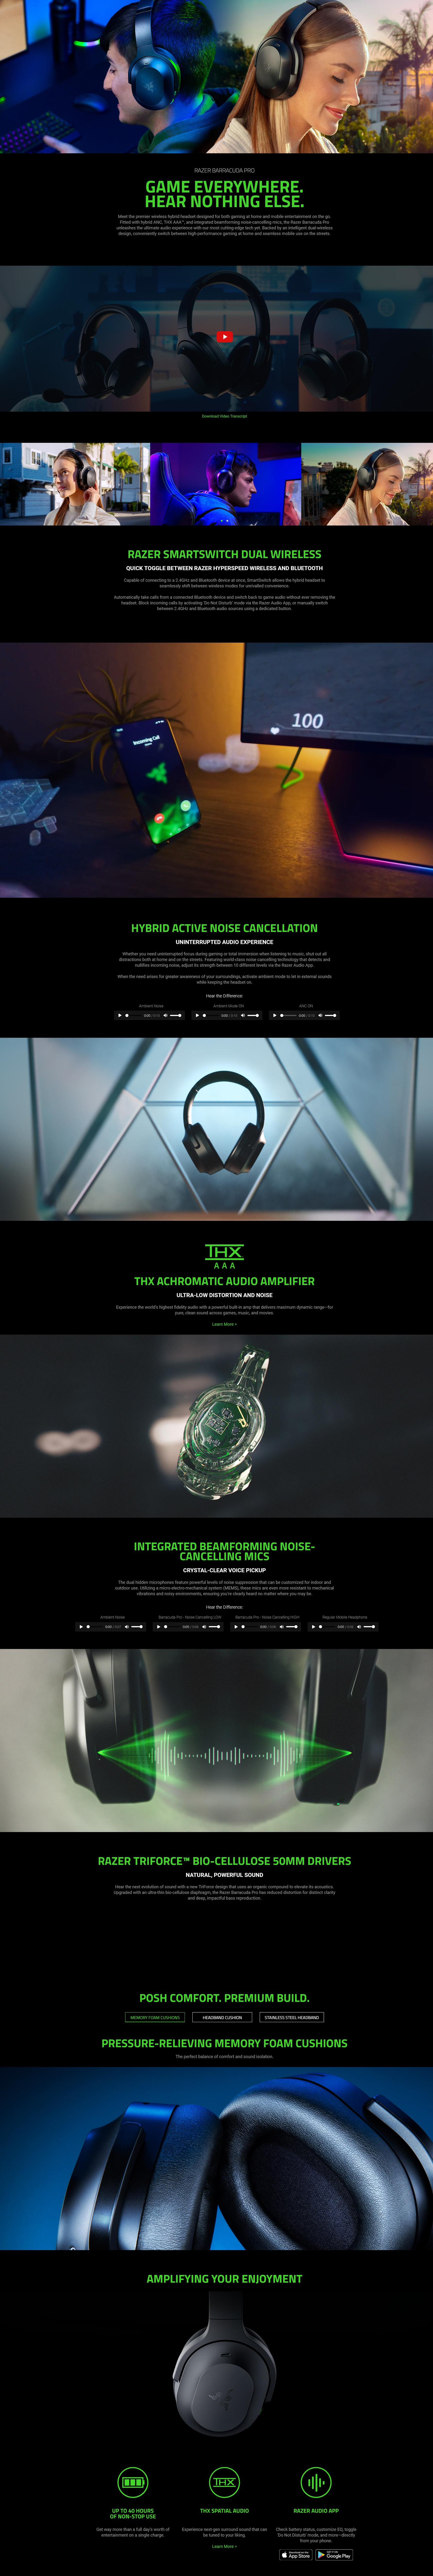 A large marketing image providing additional information about the product Razer Barracuda Pro - Wireless Gaming Headset with Hybrid Active Noise Cancellation - Additional alt info not provided